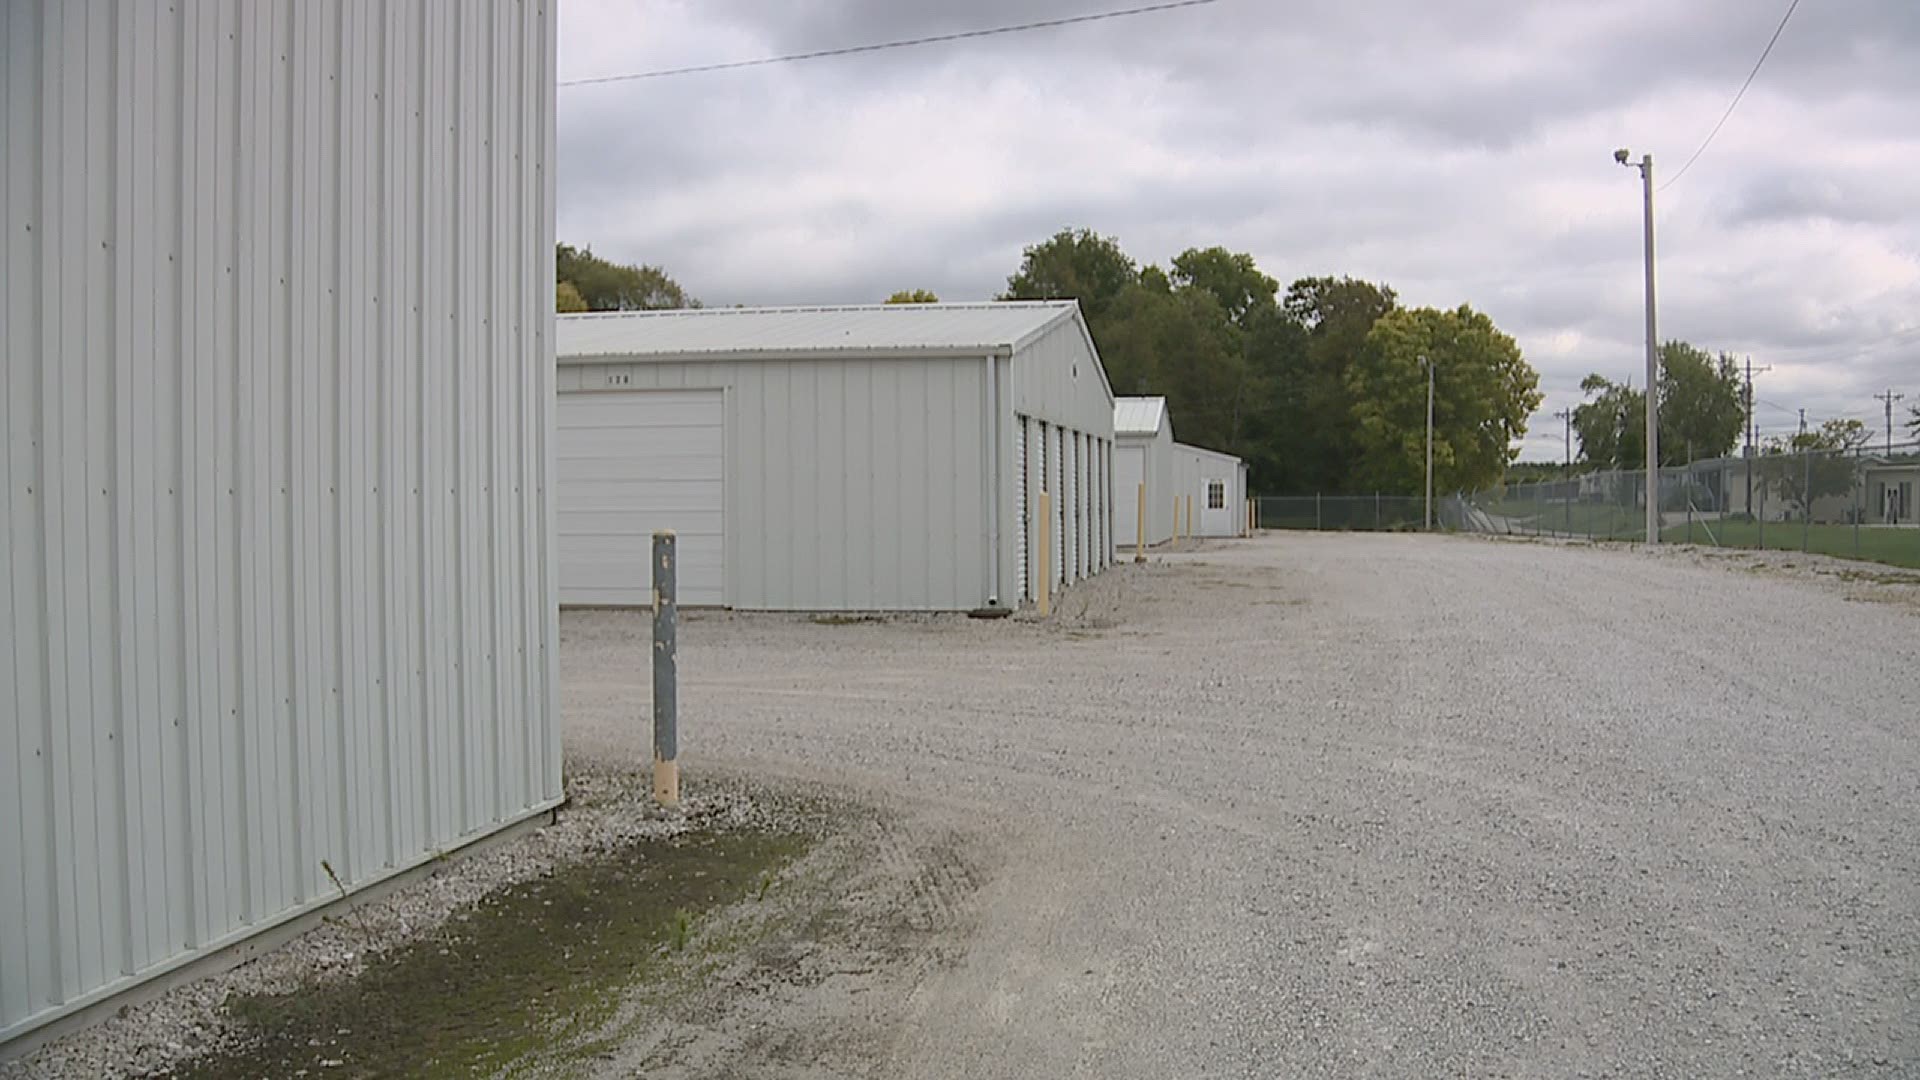 "Candy Man" says he discovered his trailer full of equipment was missing from the storage facility this past Friday.